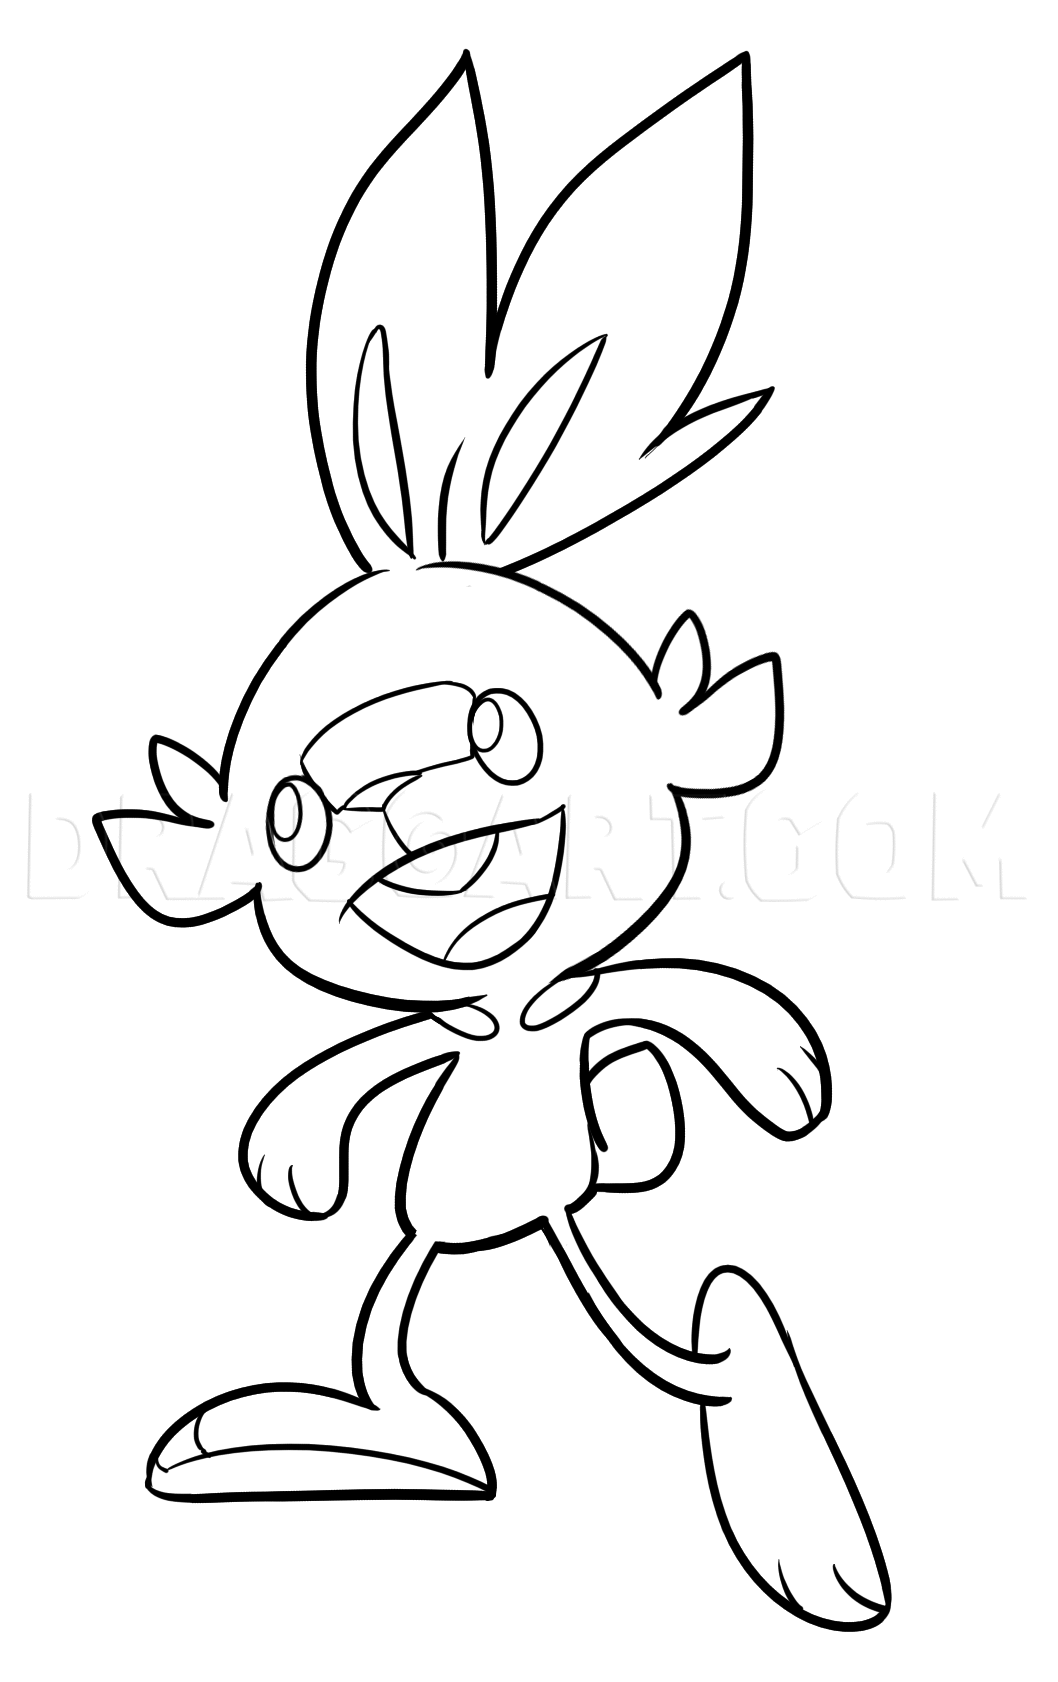 How to Draw Scorbunny,Pokemon Sword and Shield, Coloring Page, Trace Drawing